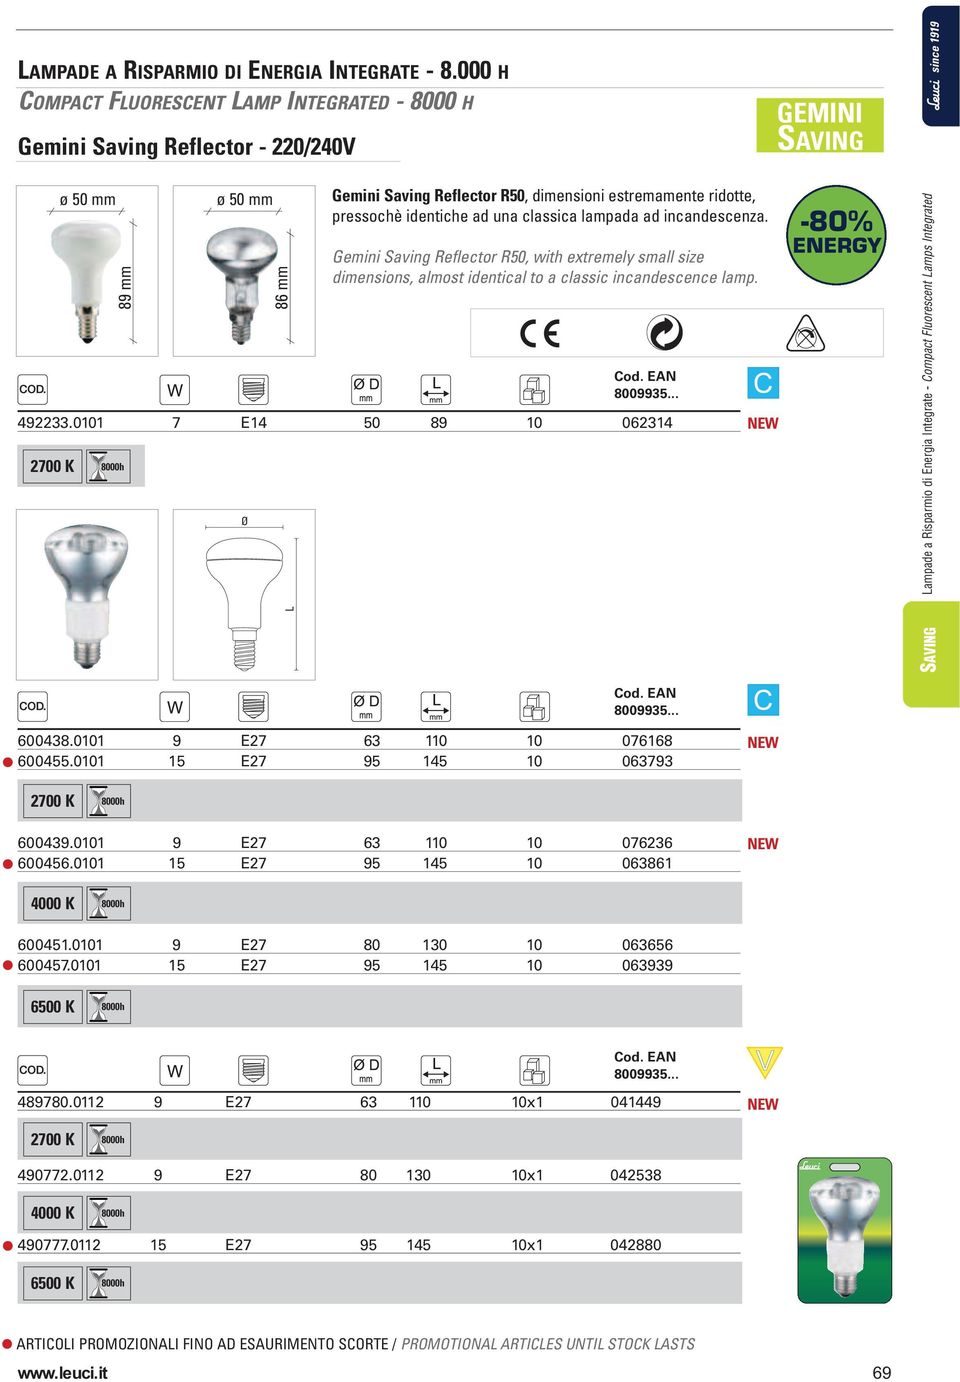 Gemini Saving Reflector R50, with extremely small size dimensions, almost identical to a classic incandescence lamp.